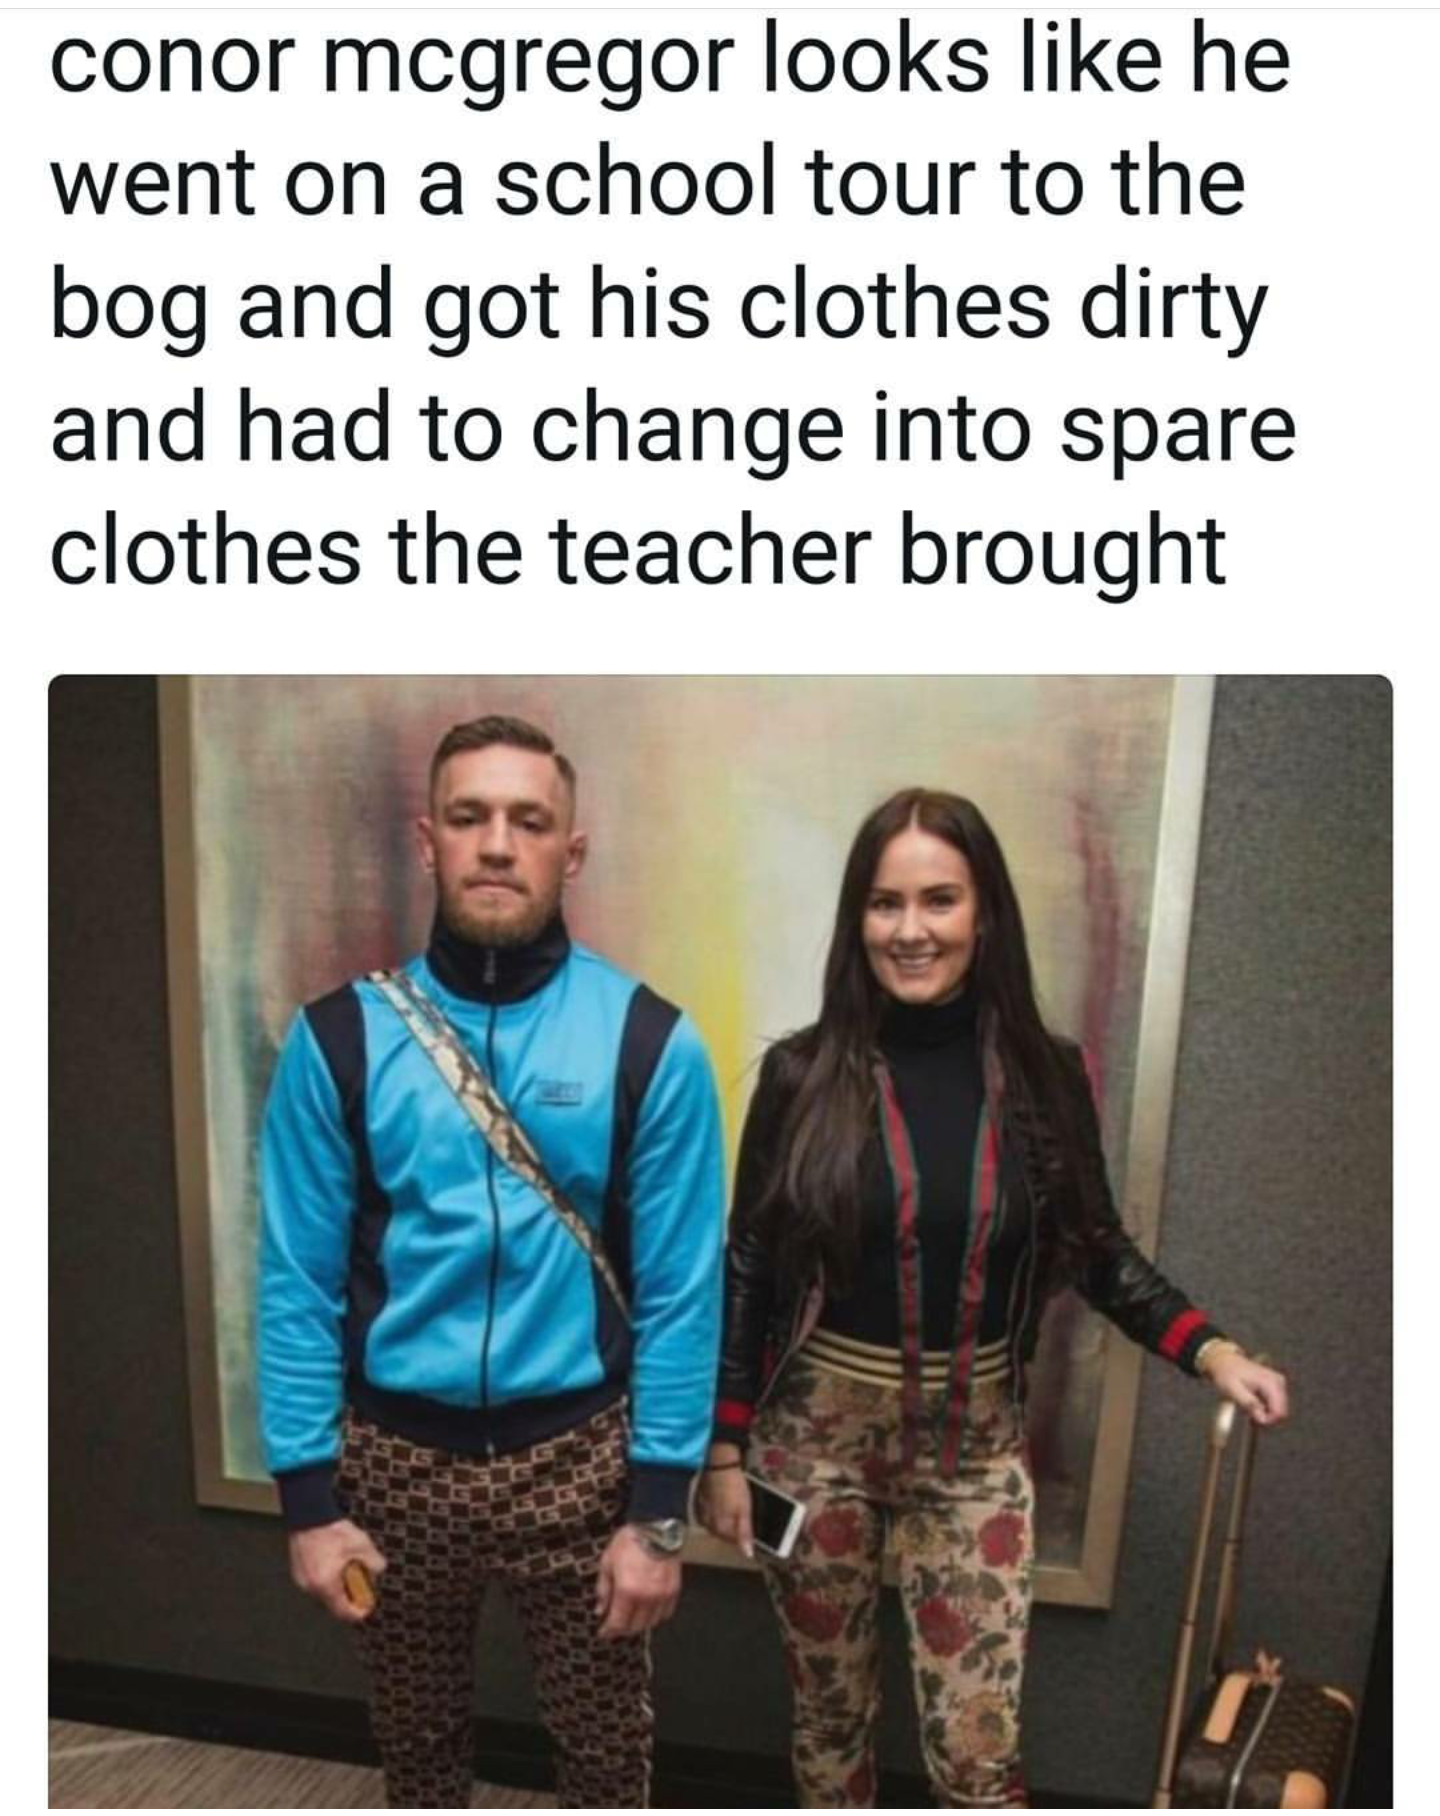 conor mcgregor dee devlin - conor mcgregor looks he went on a school tour to the bog and got his clothes dirty and had to change into spare clothes the teacher brought